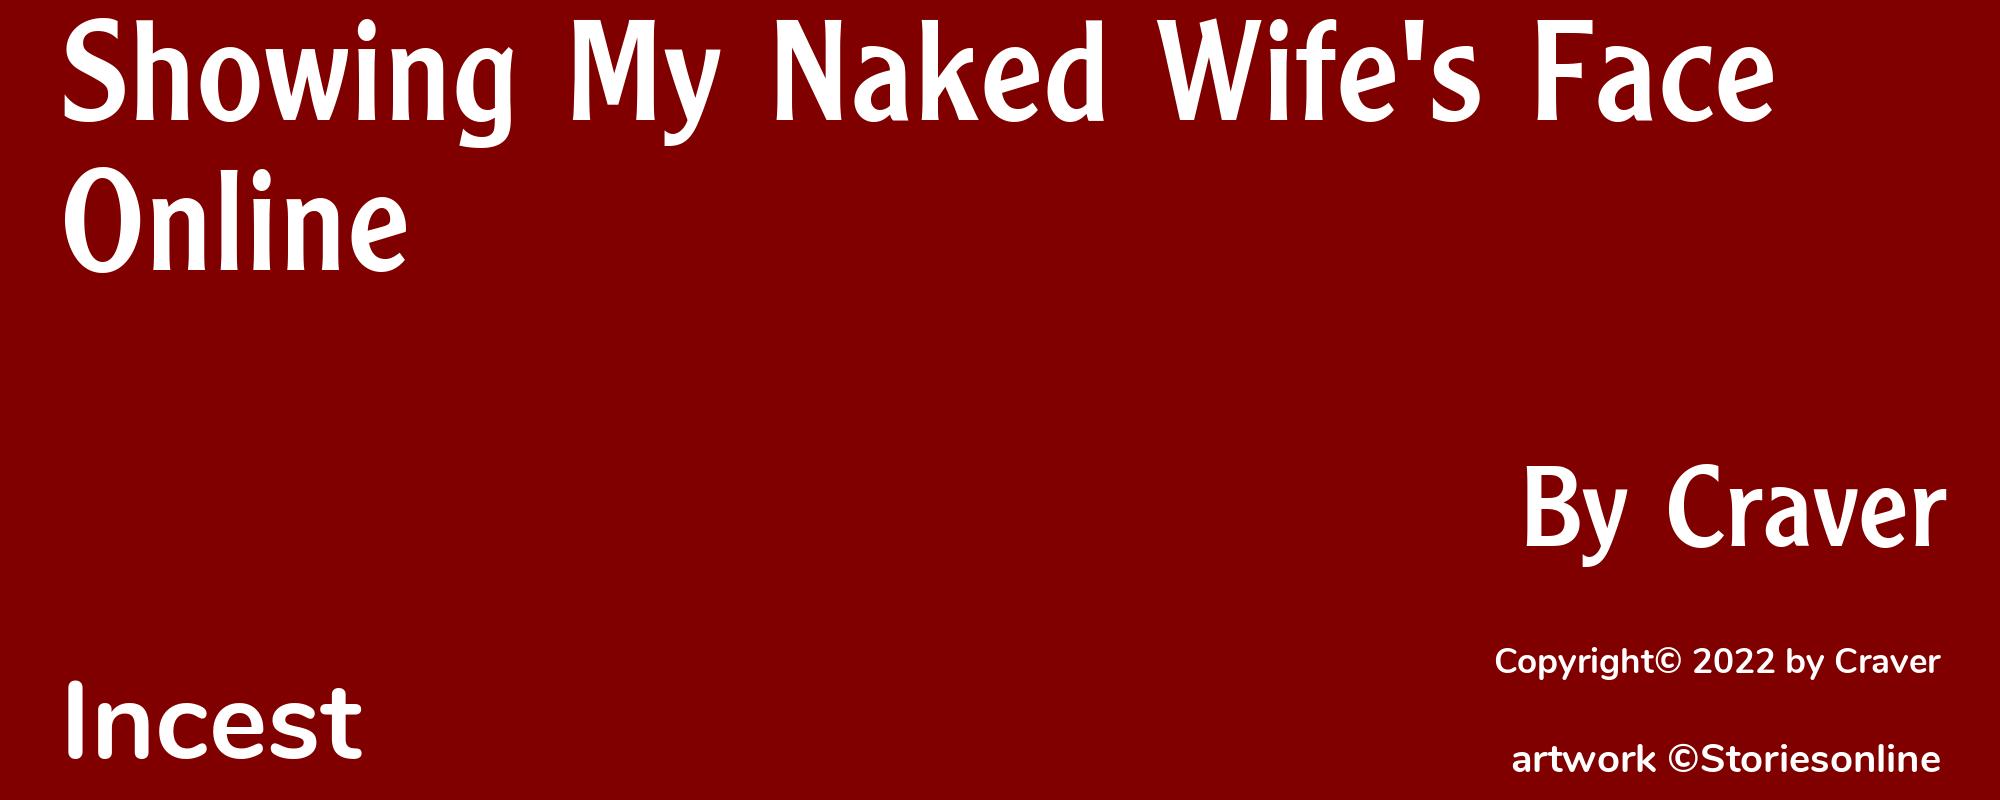 Showing My Naked Wife's Face Online - Cover